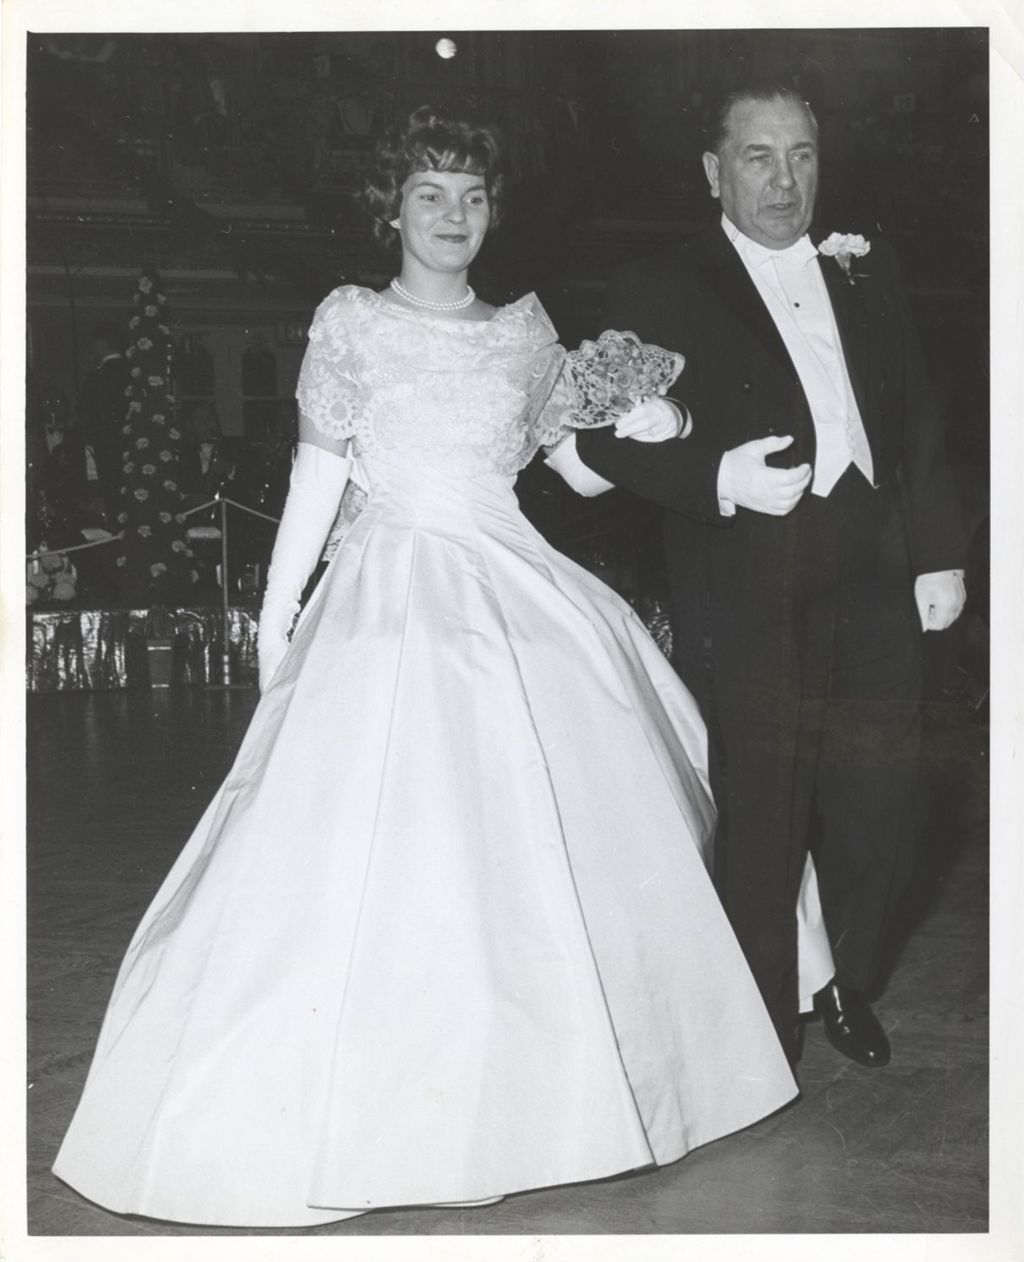 Miniature of Eleanor R. Daley and Richard J. Daley at a Presentation Ball